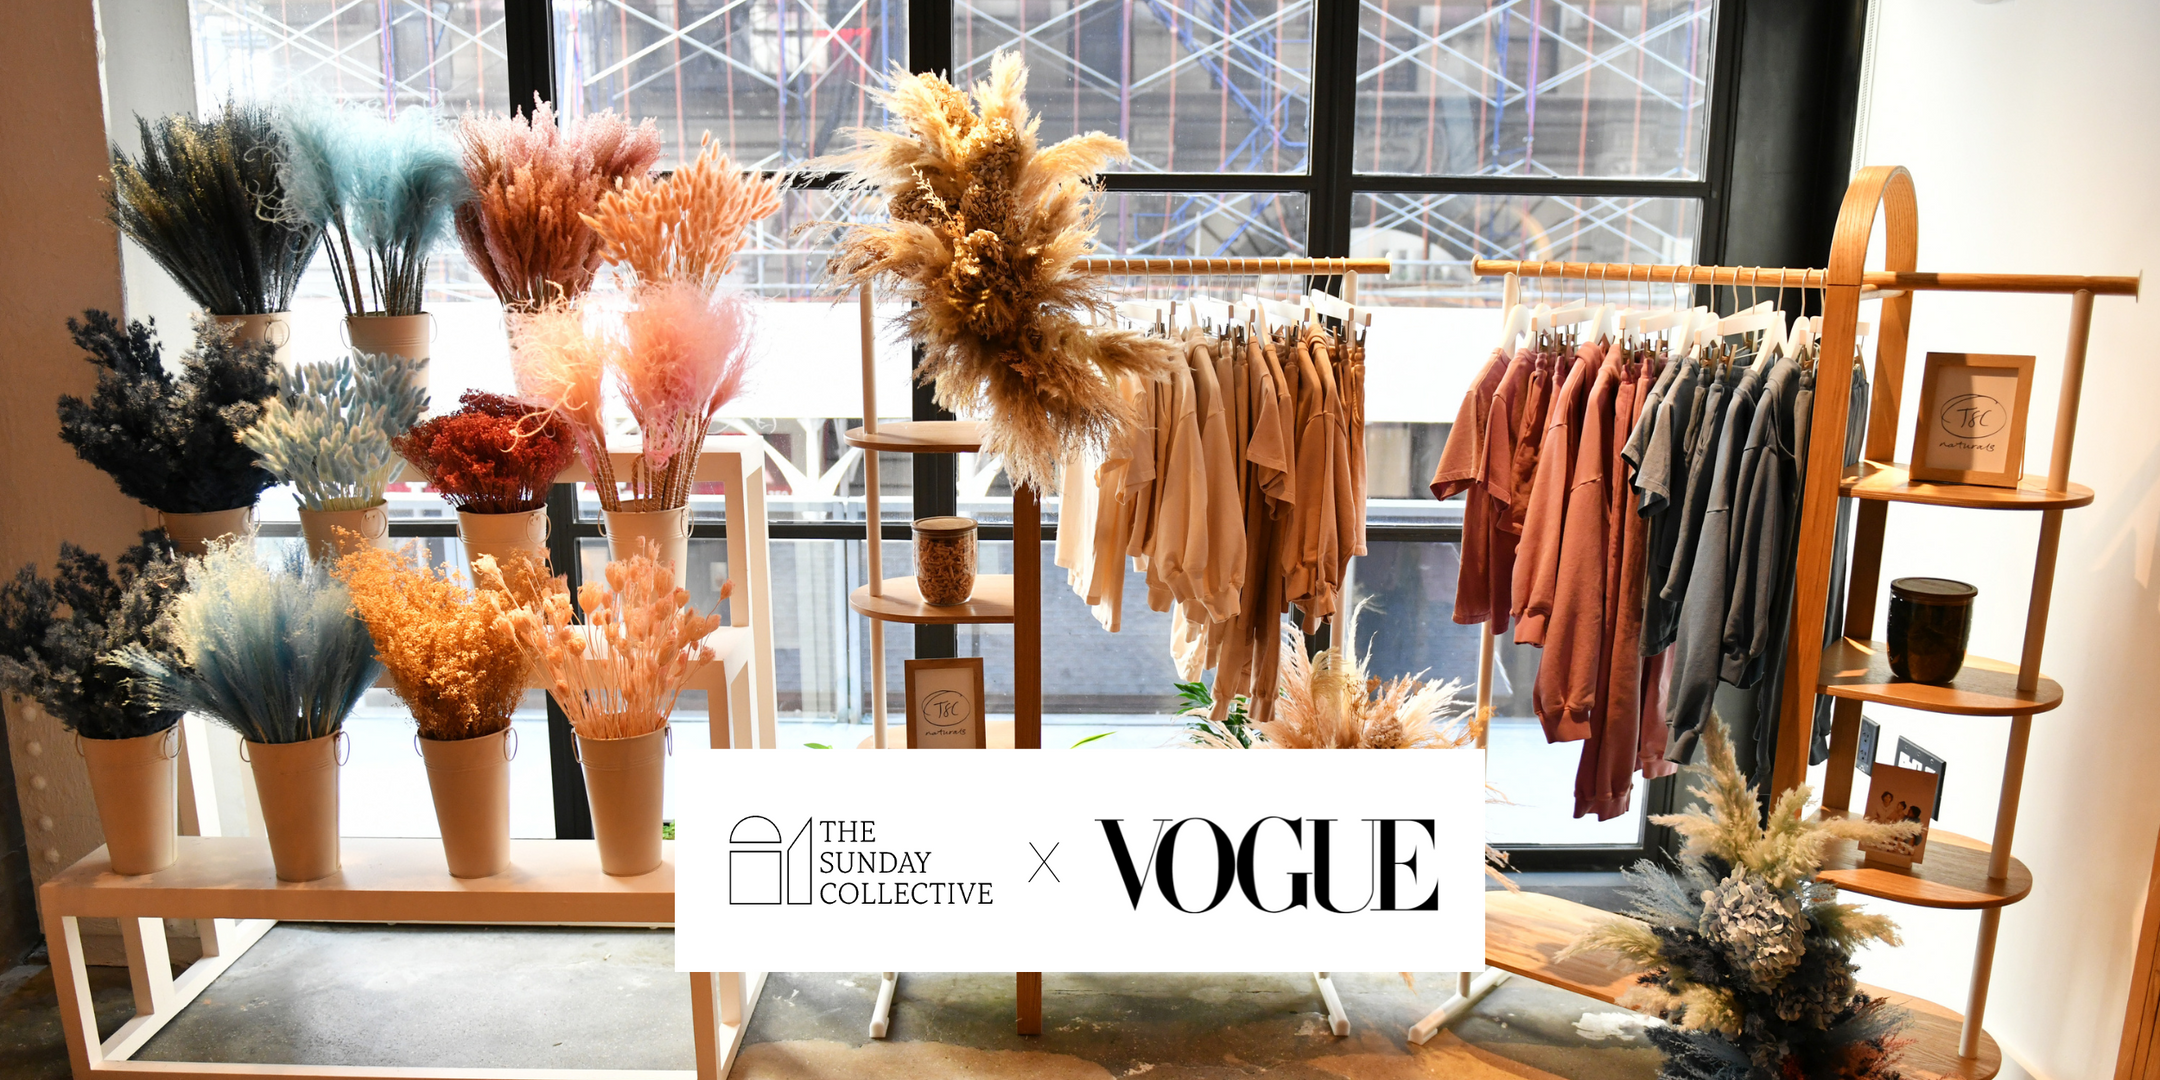 TSC Naturals Event: The Sunday Collective x Vogue